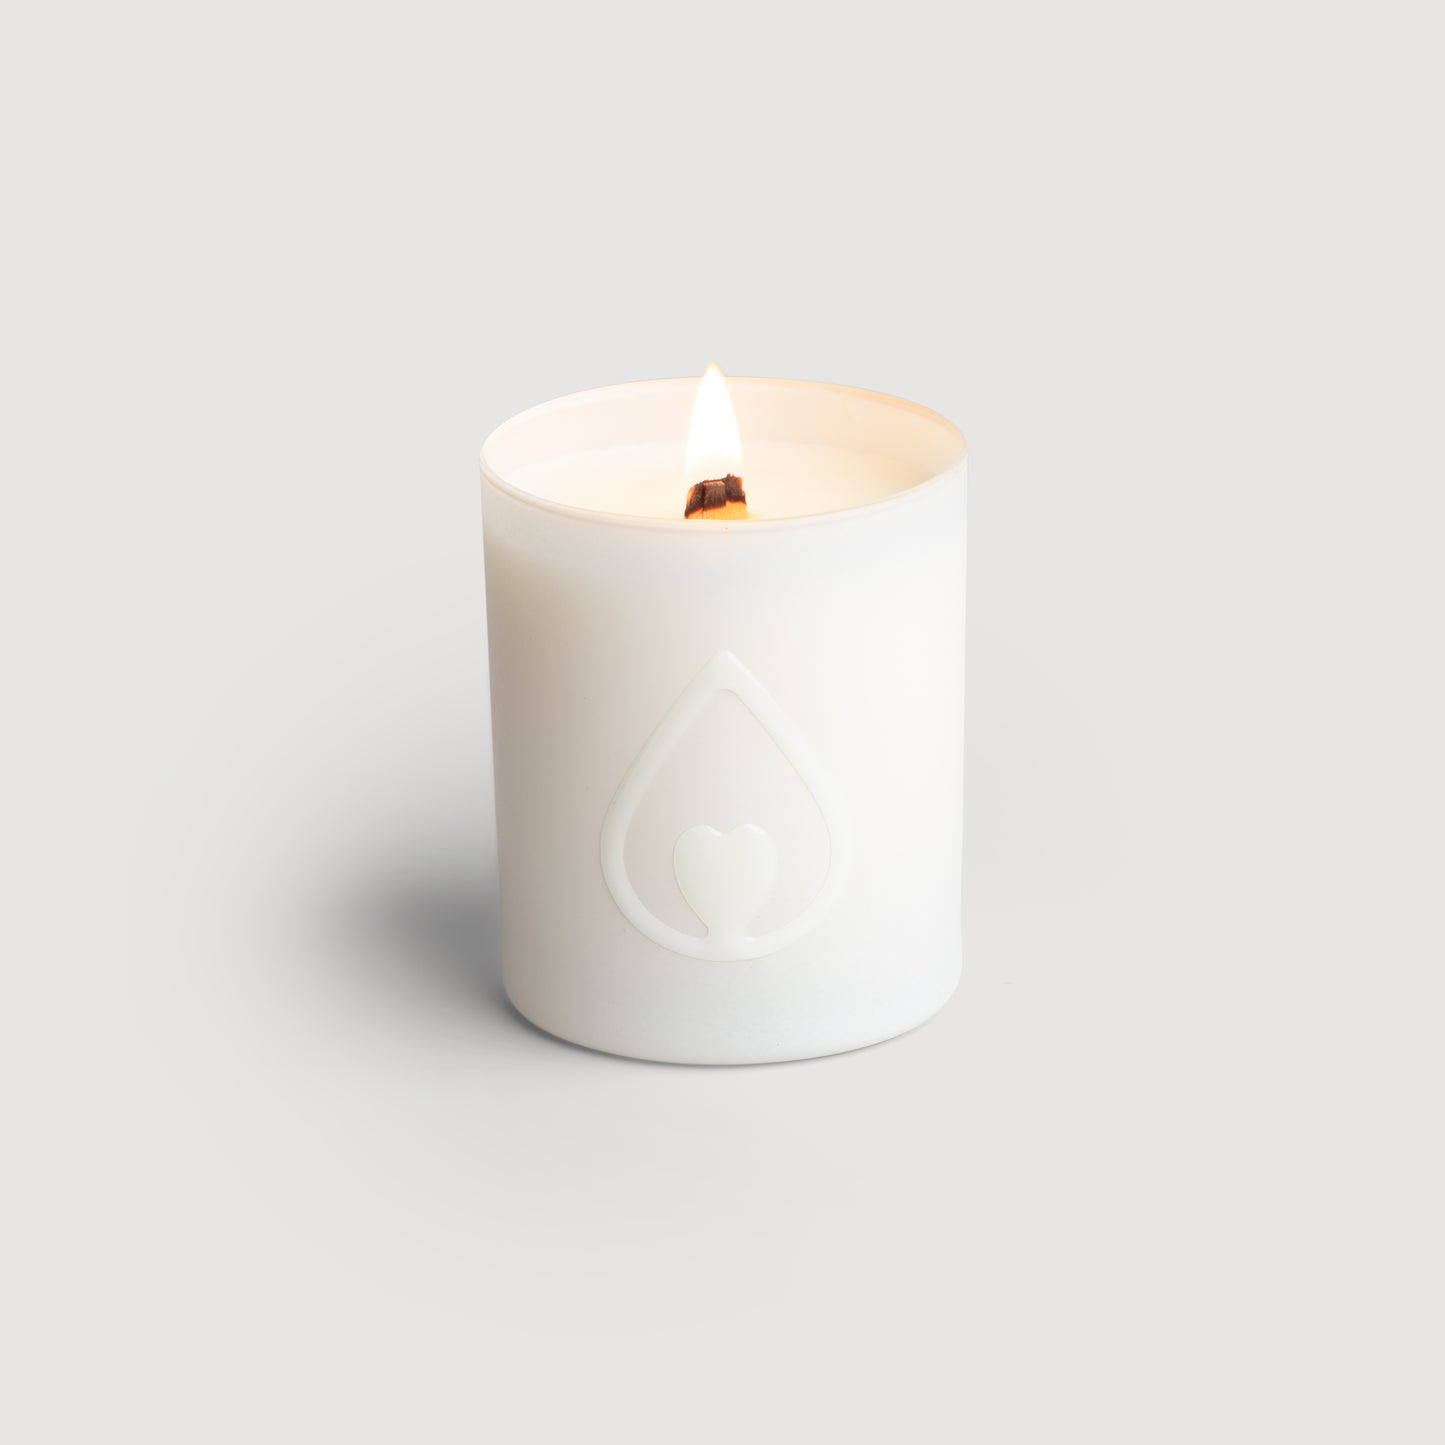 Ultimate Bundle - 3 x Large Candles for the price of 2!